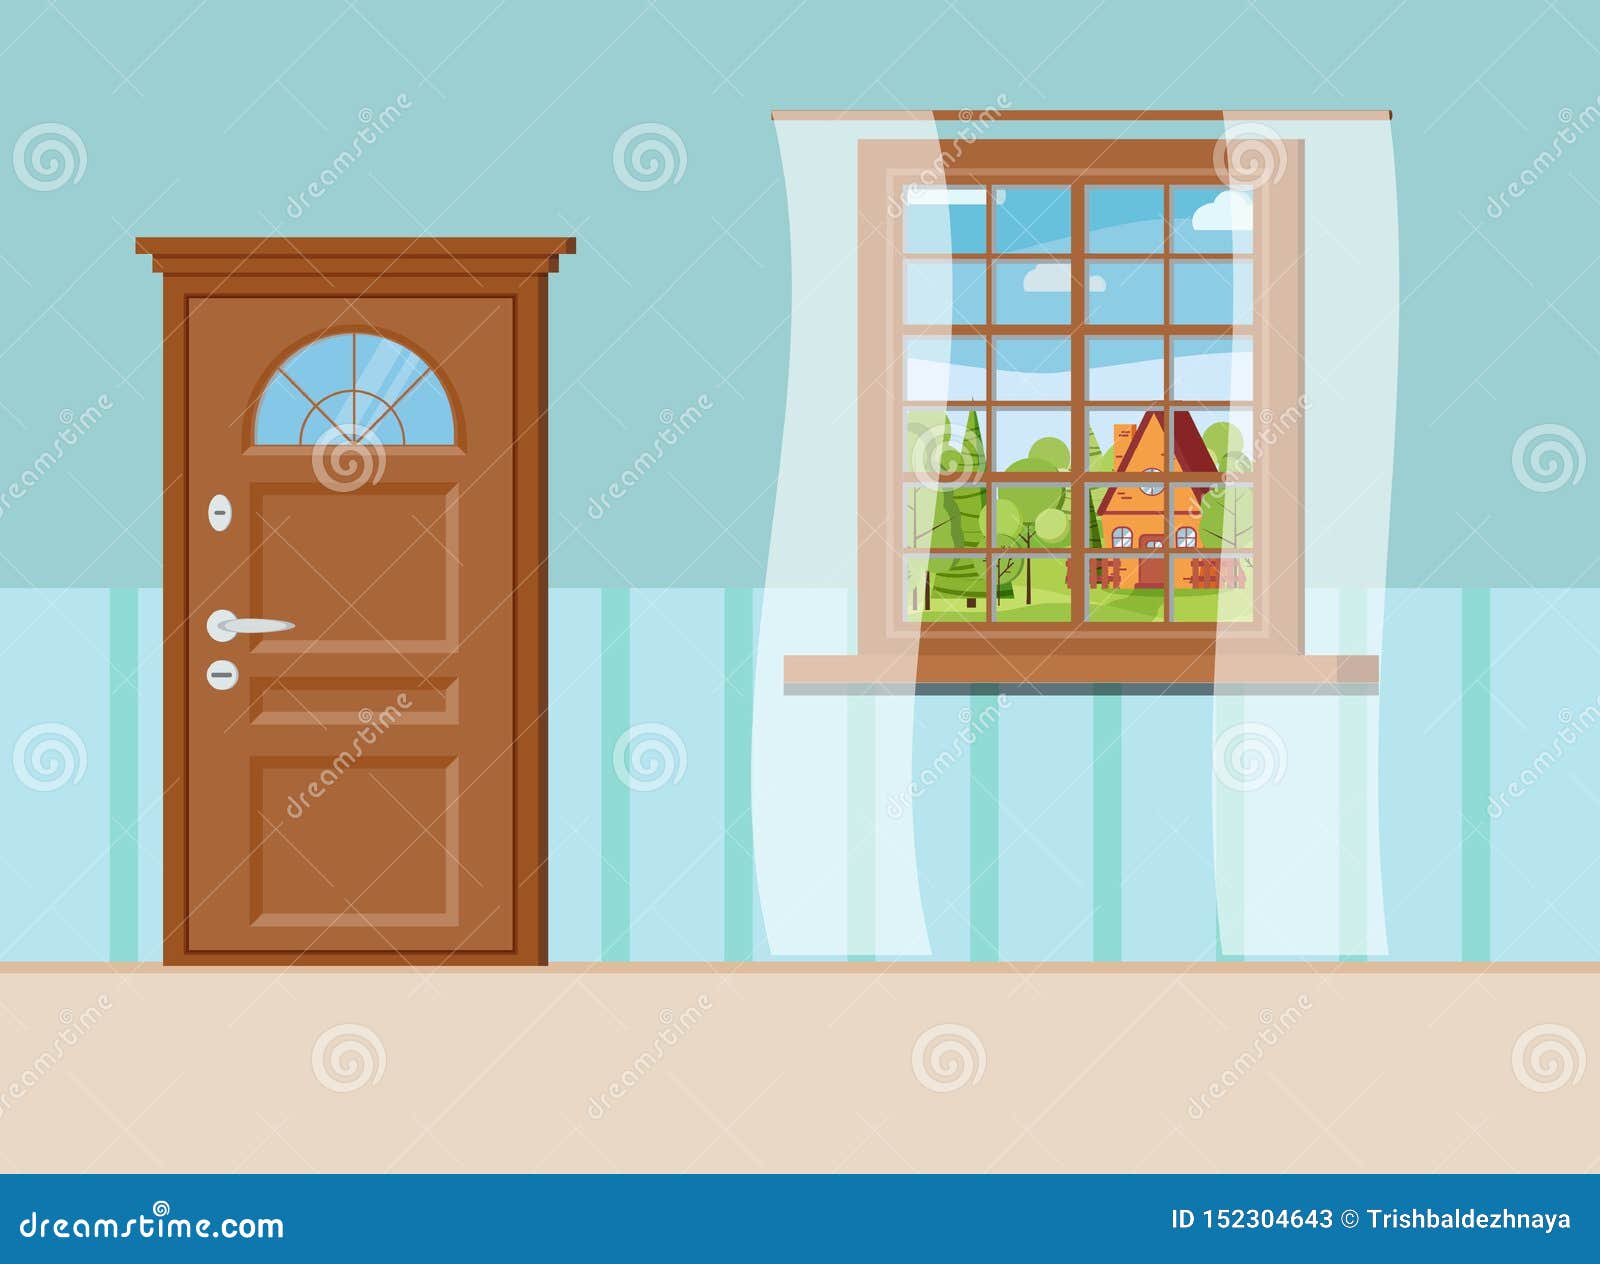 Wooden Closed Entrance Door and Window with Summer View of Landscape with  Cartoon House Stock Vector - Illustration of cartoon, house: 152304643